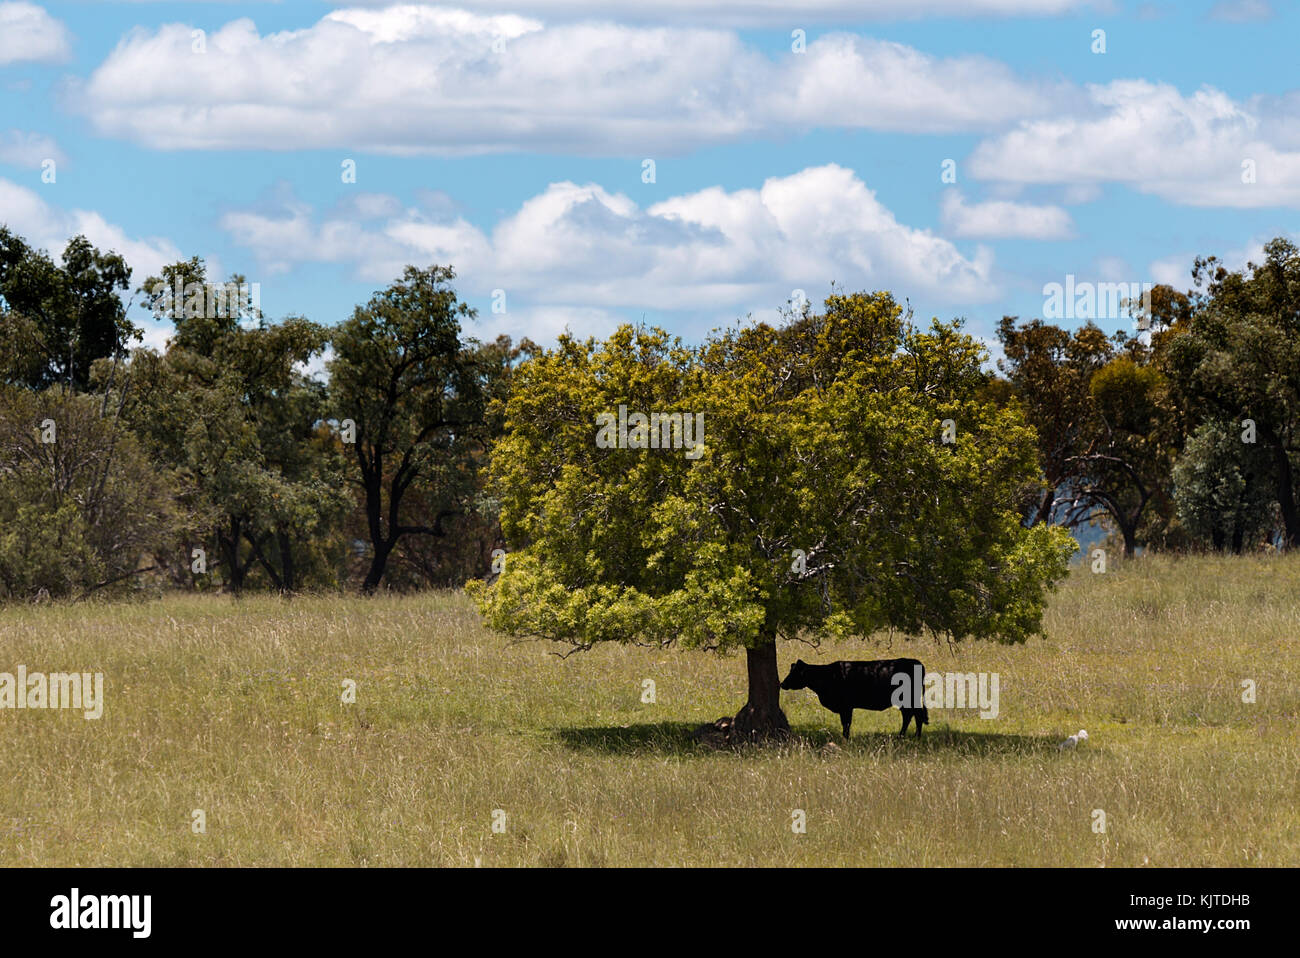 Cow seeking shade under a single tree on the open plains of the grasslands - New South Wales Australia. Stock Photo